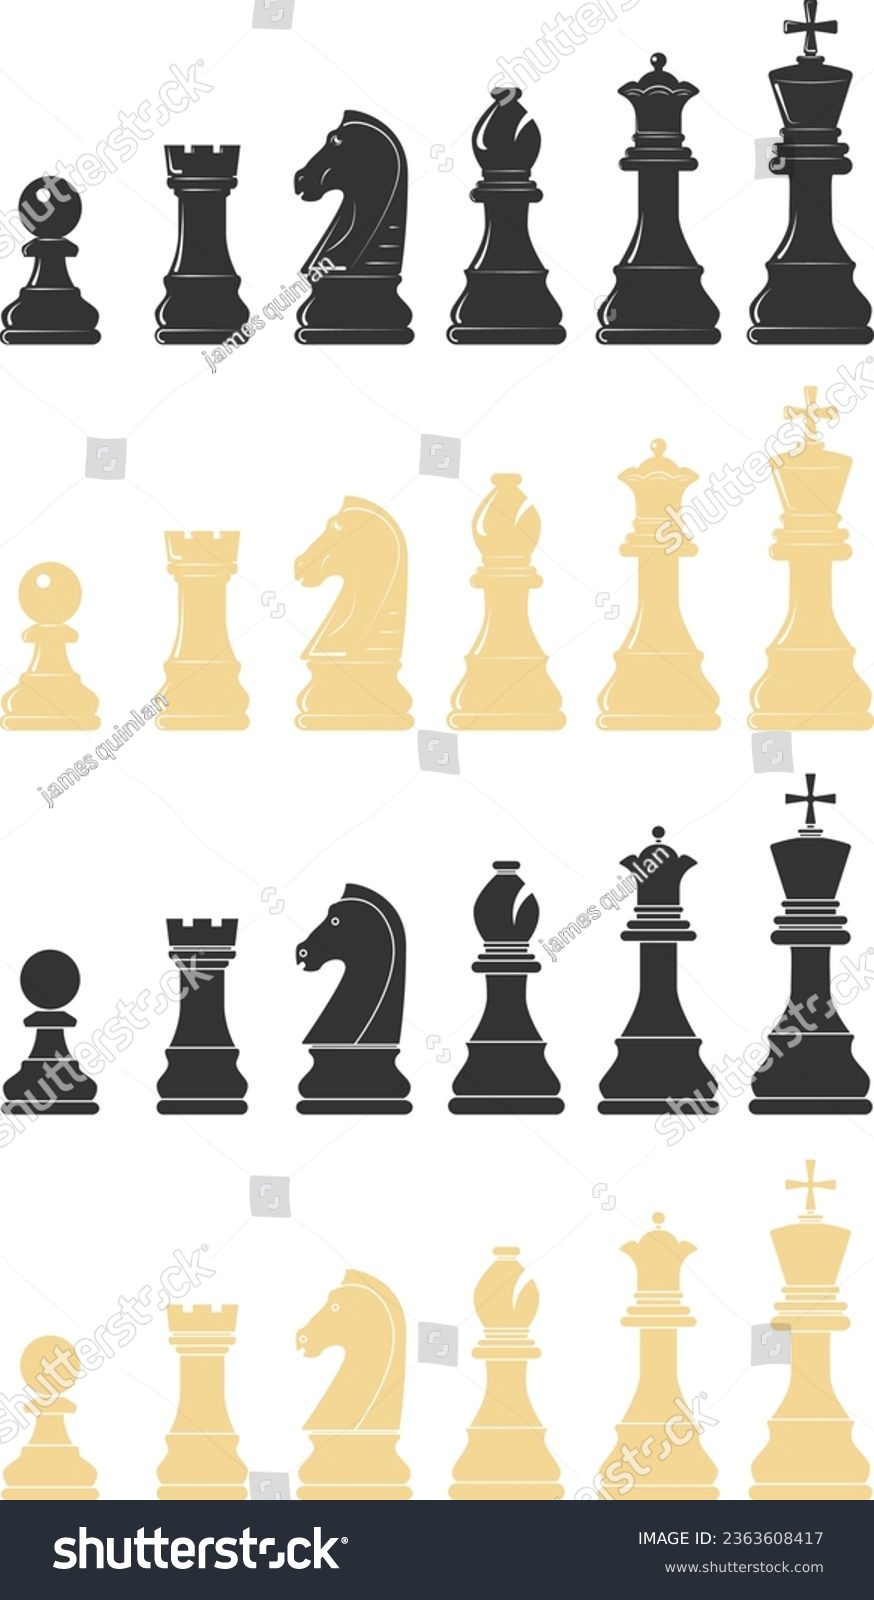 SVG of Chess pieces collection. Chess set all pieces. Pawn, knight, rook, bishop, queenand king vector illustrations. svg